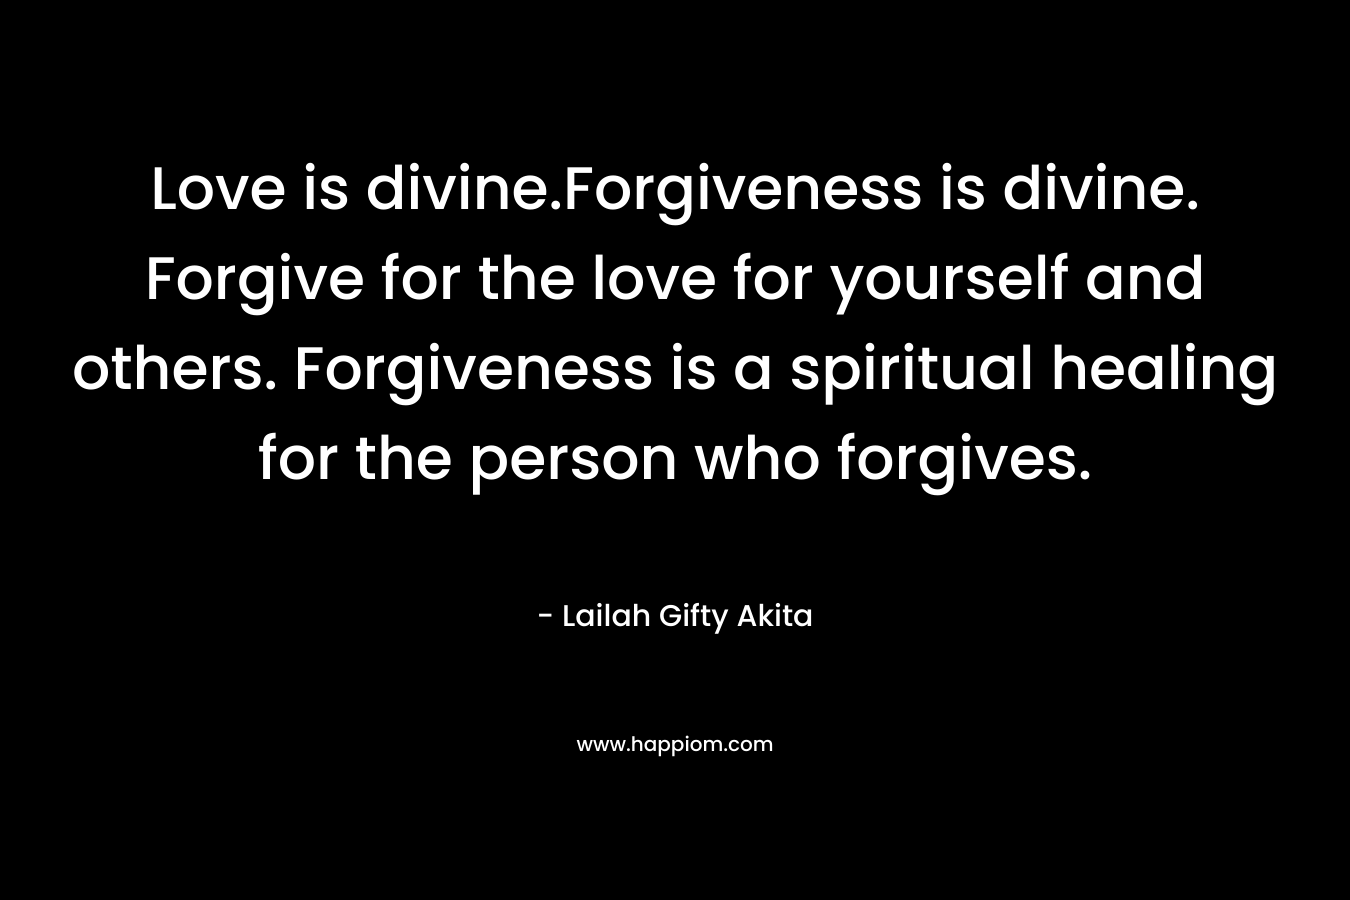 Love is divine.Forgiveness is divine. Forgive for the love for yourself and others. Forgiveness is a spiritual healing for the person who forgives.